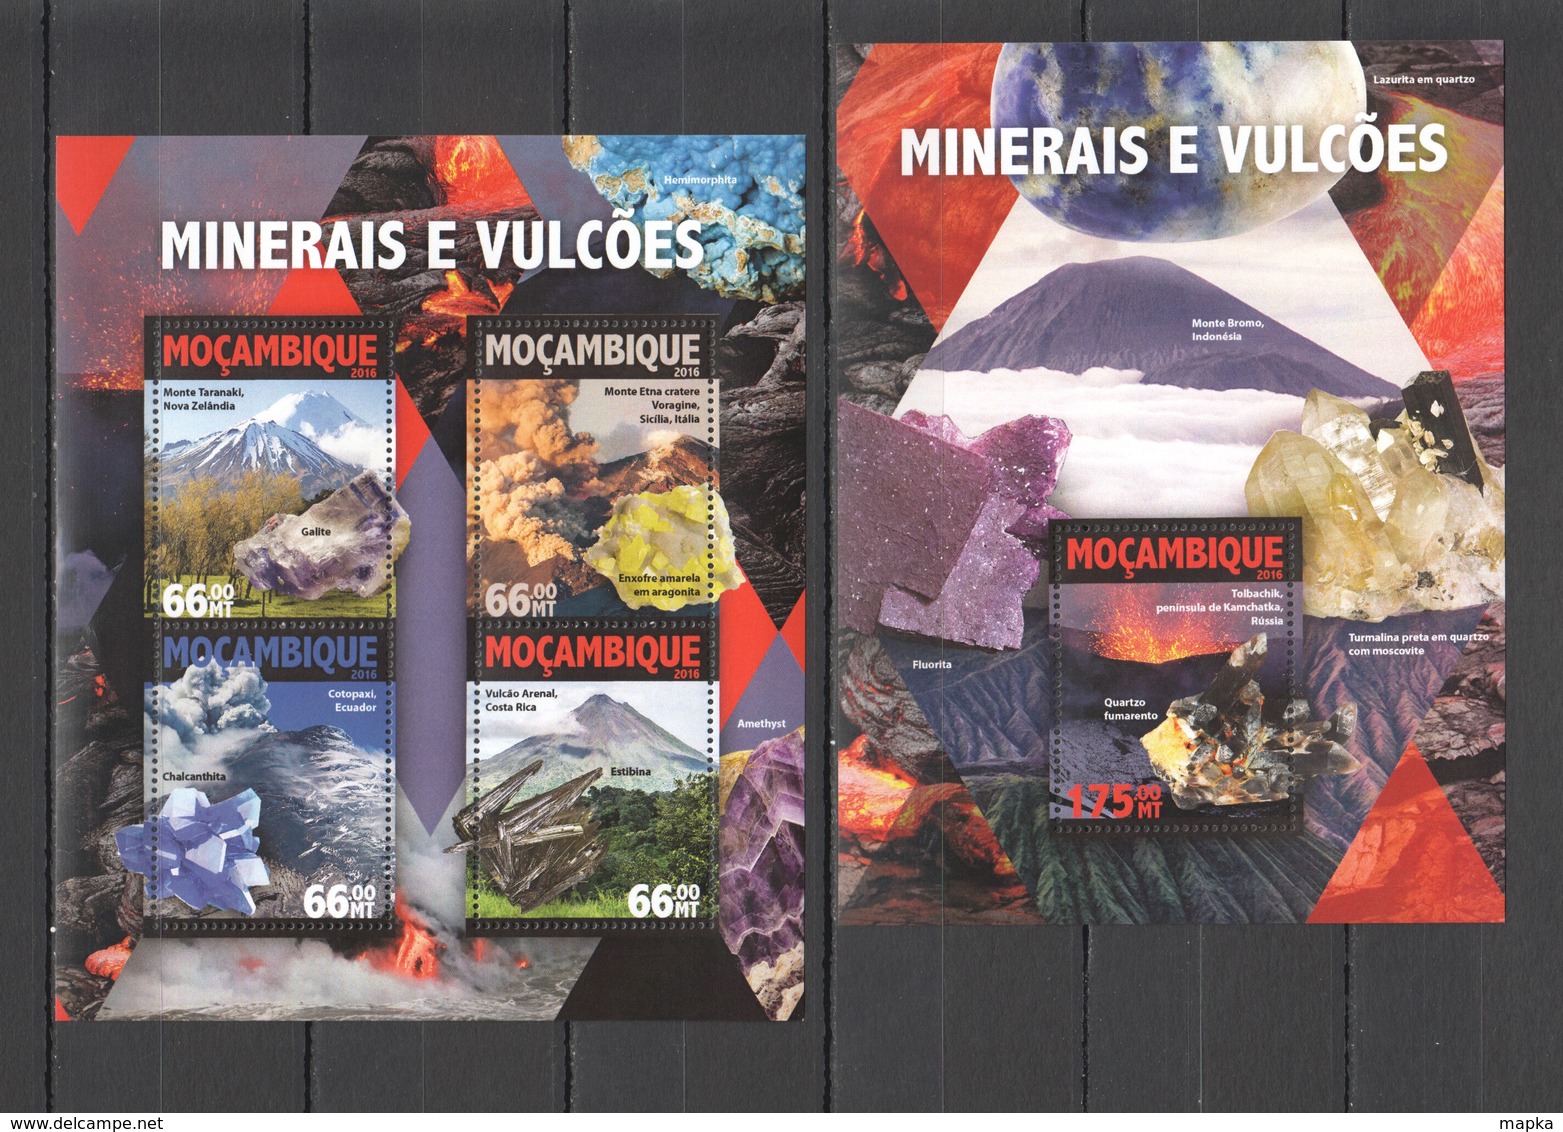 ST2179 2016 MOZAMBIQUE MOCAMBIQUE MINERALS AND VOLCANOES 1KB+1BL MNH - Volcanos